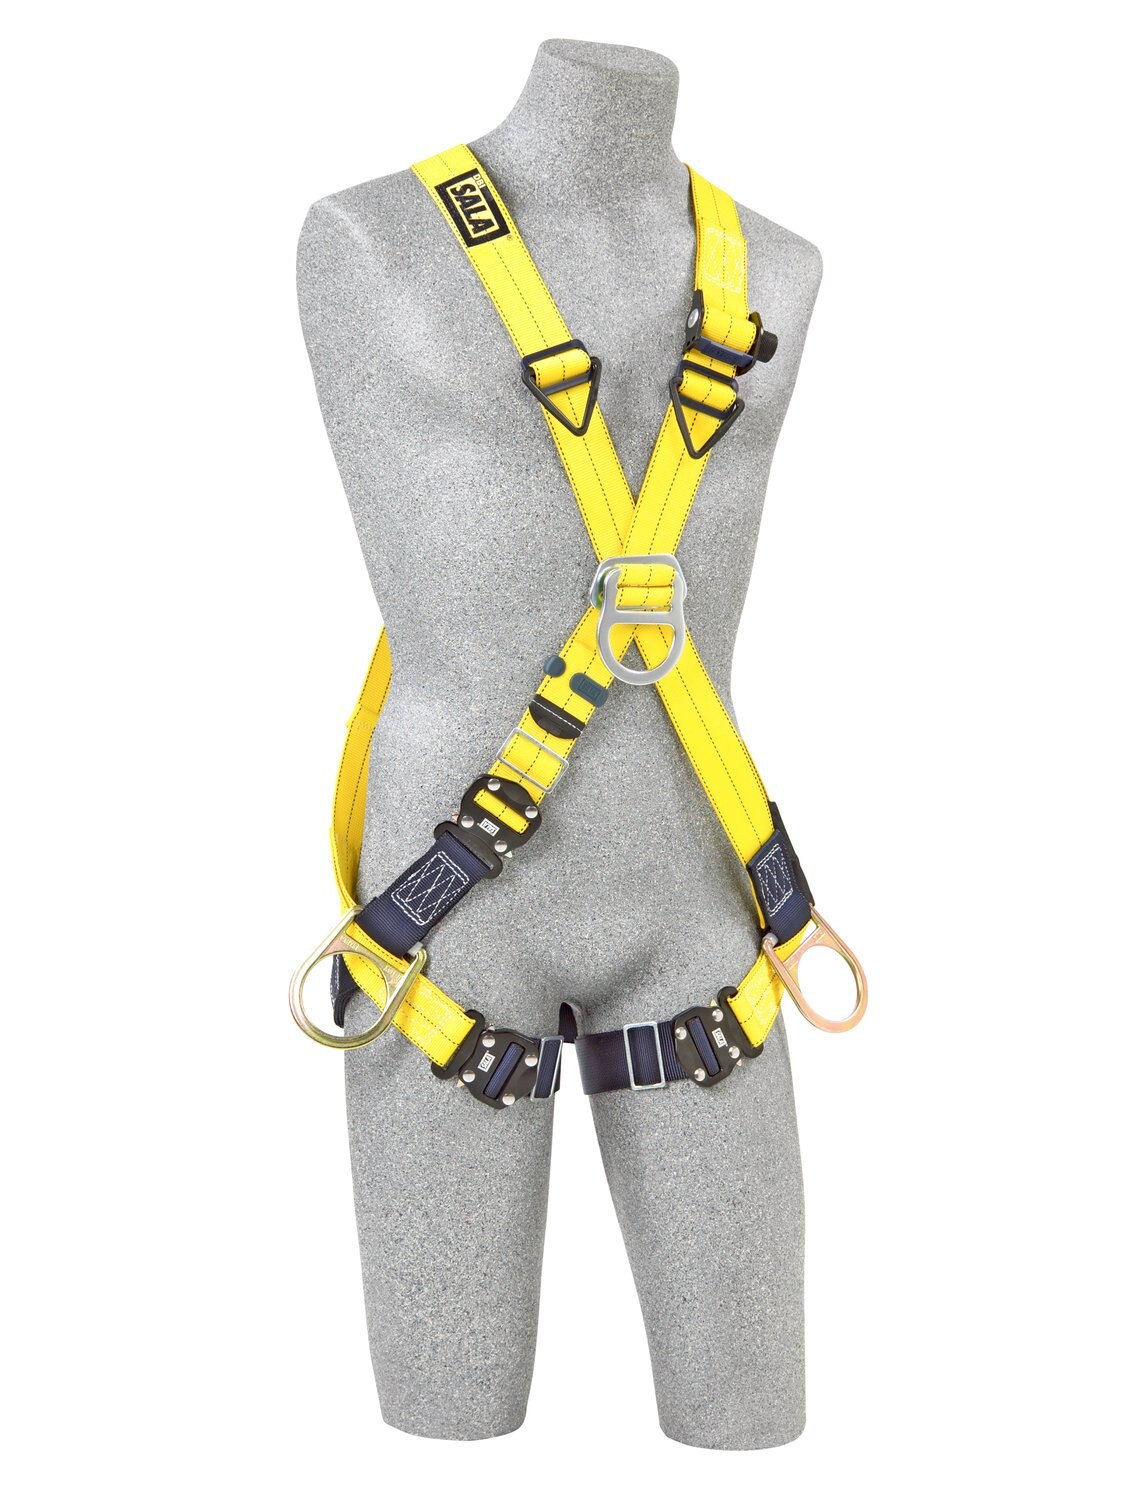 7012815919 - 3M DBI-SALA Delta Cross-Over Climbing/Positioning Safety Harness 1112402, Large